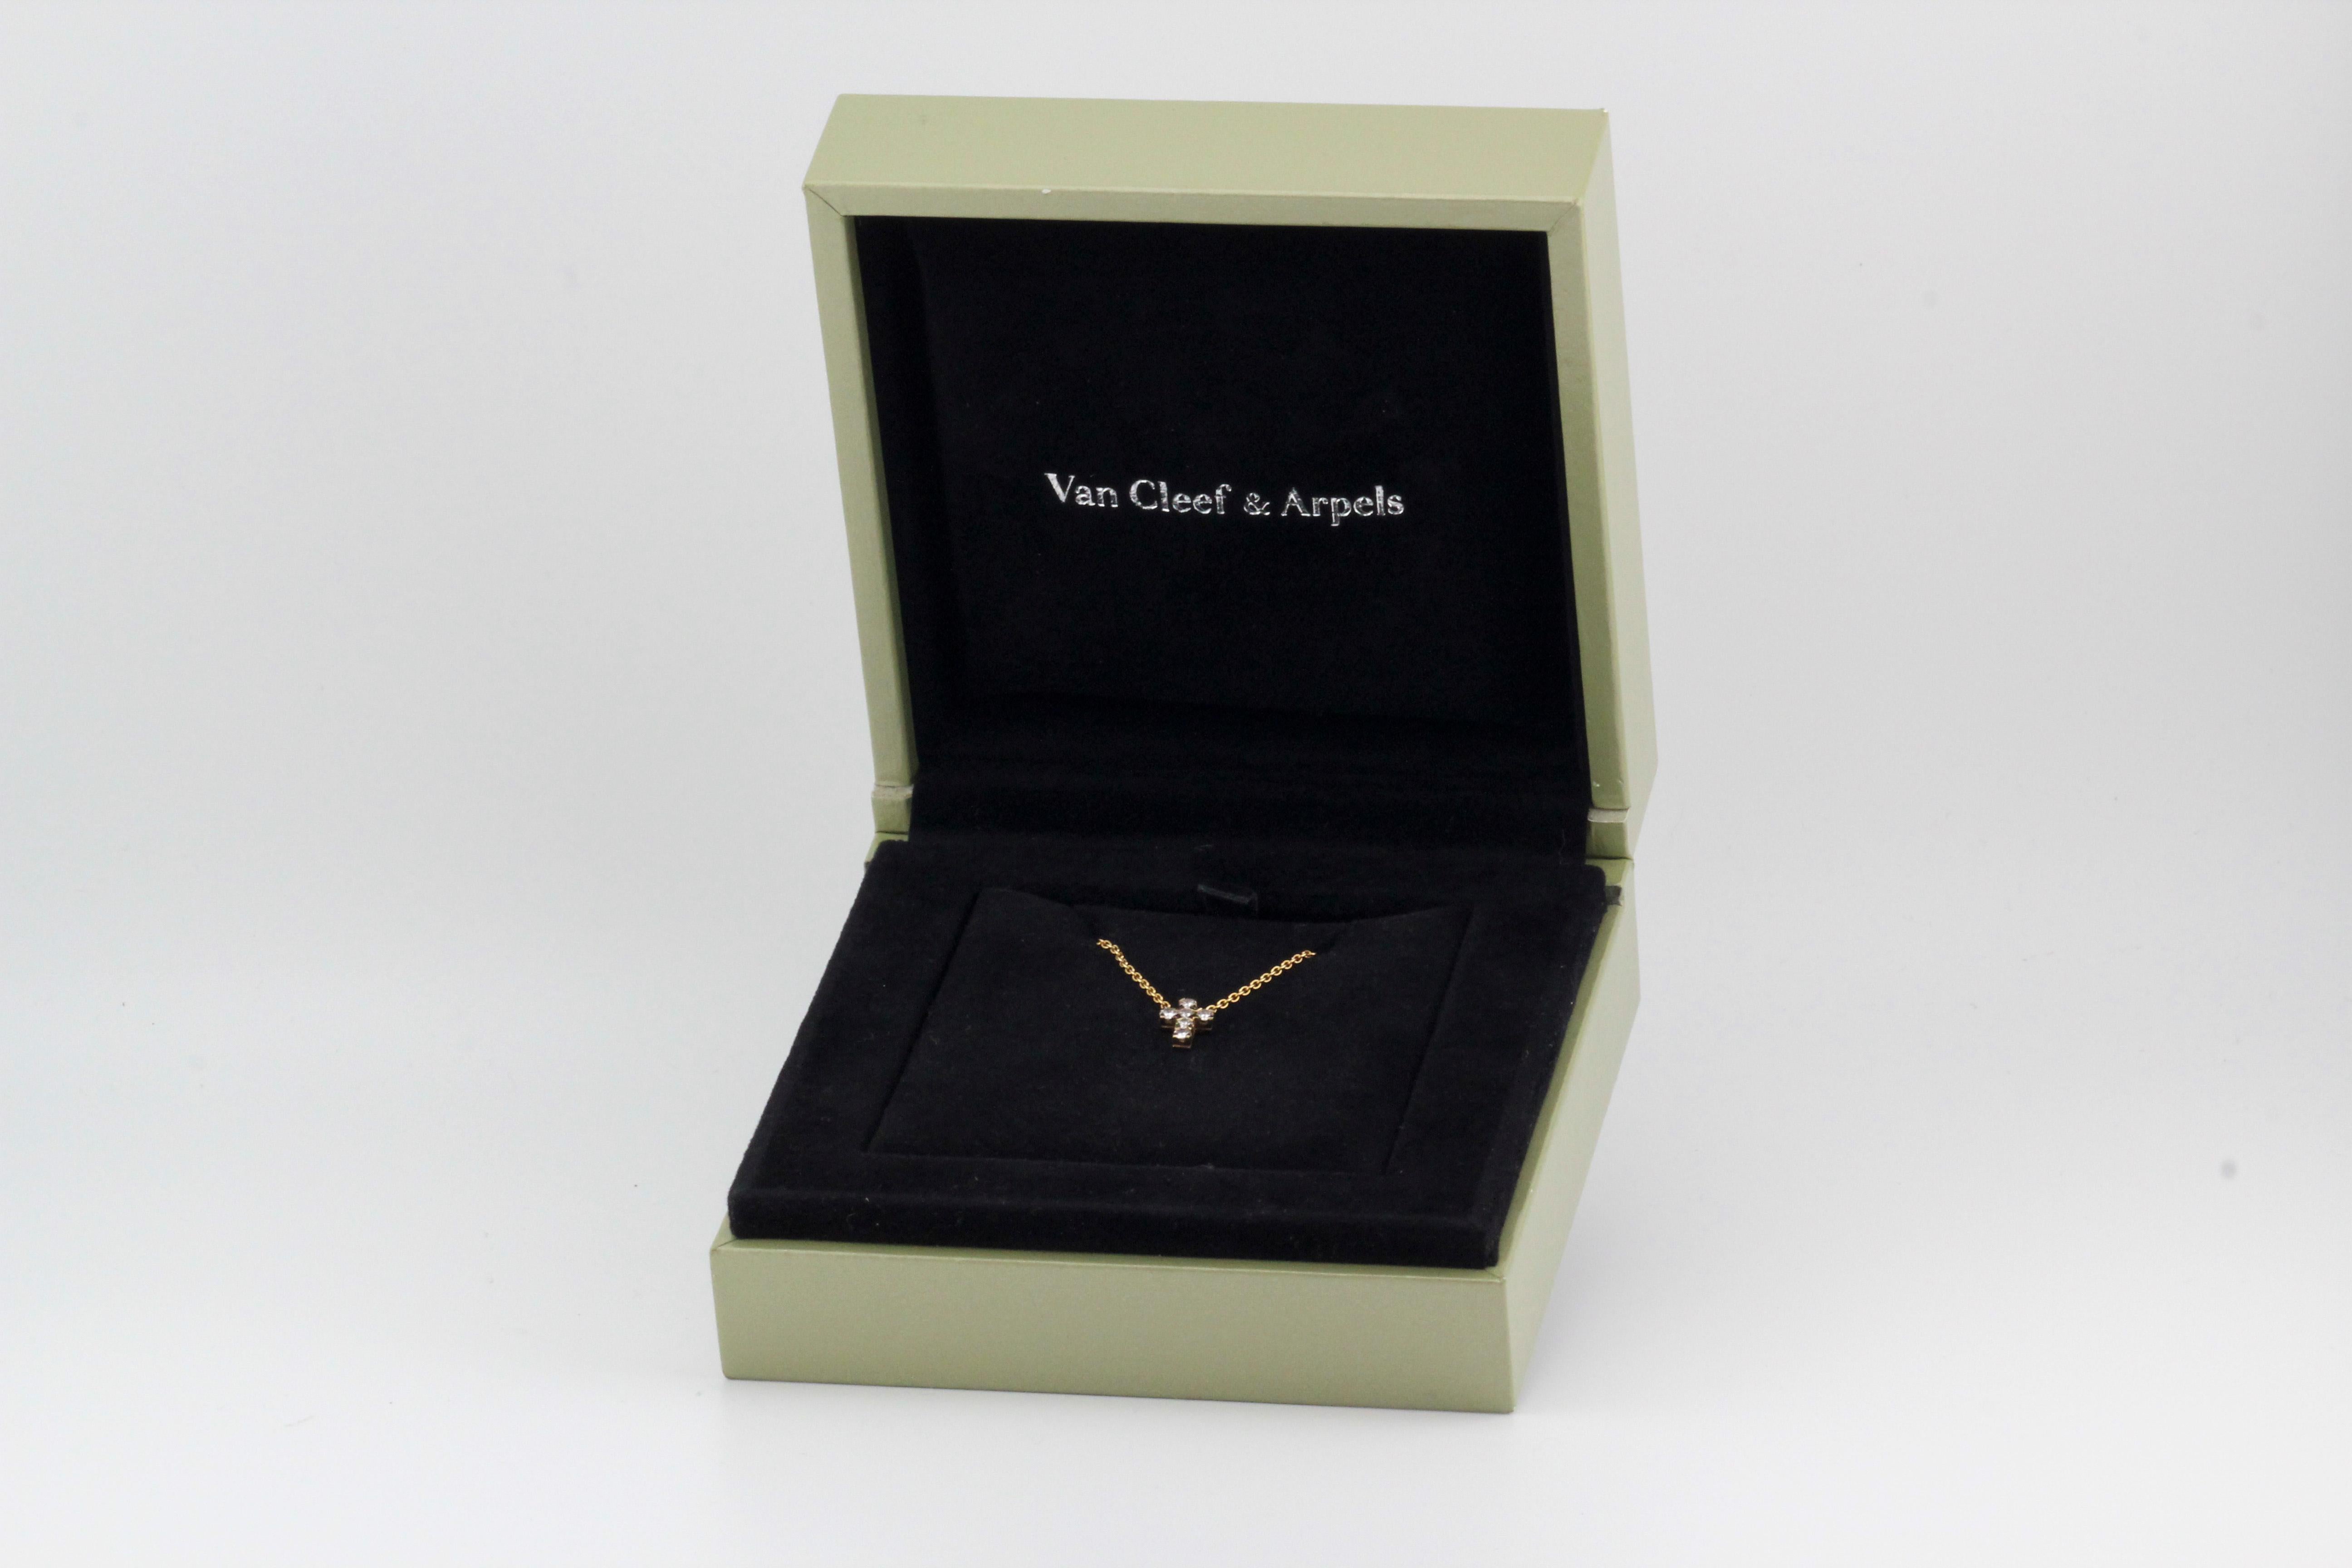 Van Cleef & Arpels Diamond 18K Yellow Gold Cross Pendant Necklace In Good Condition For Sale In Bellmore, NY